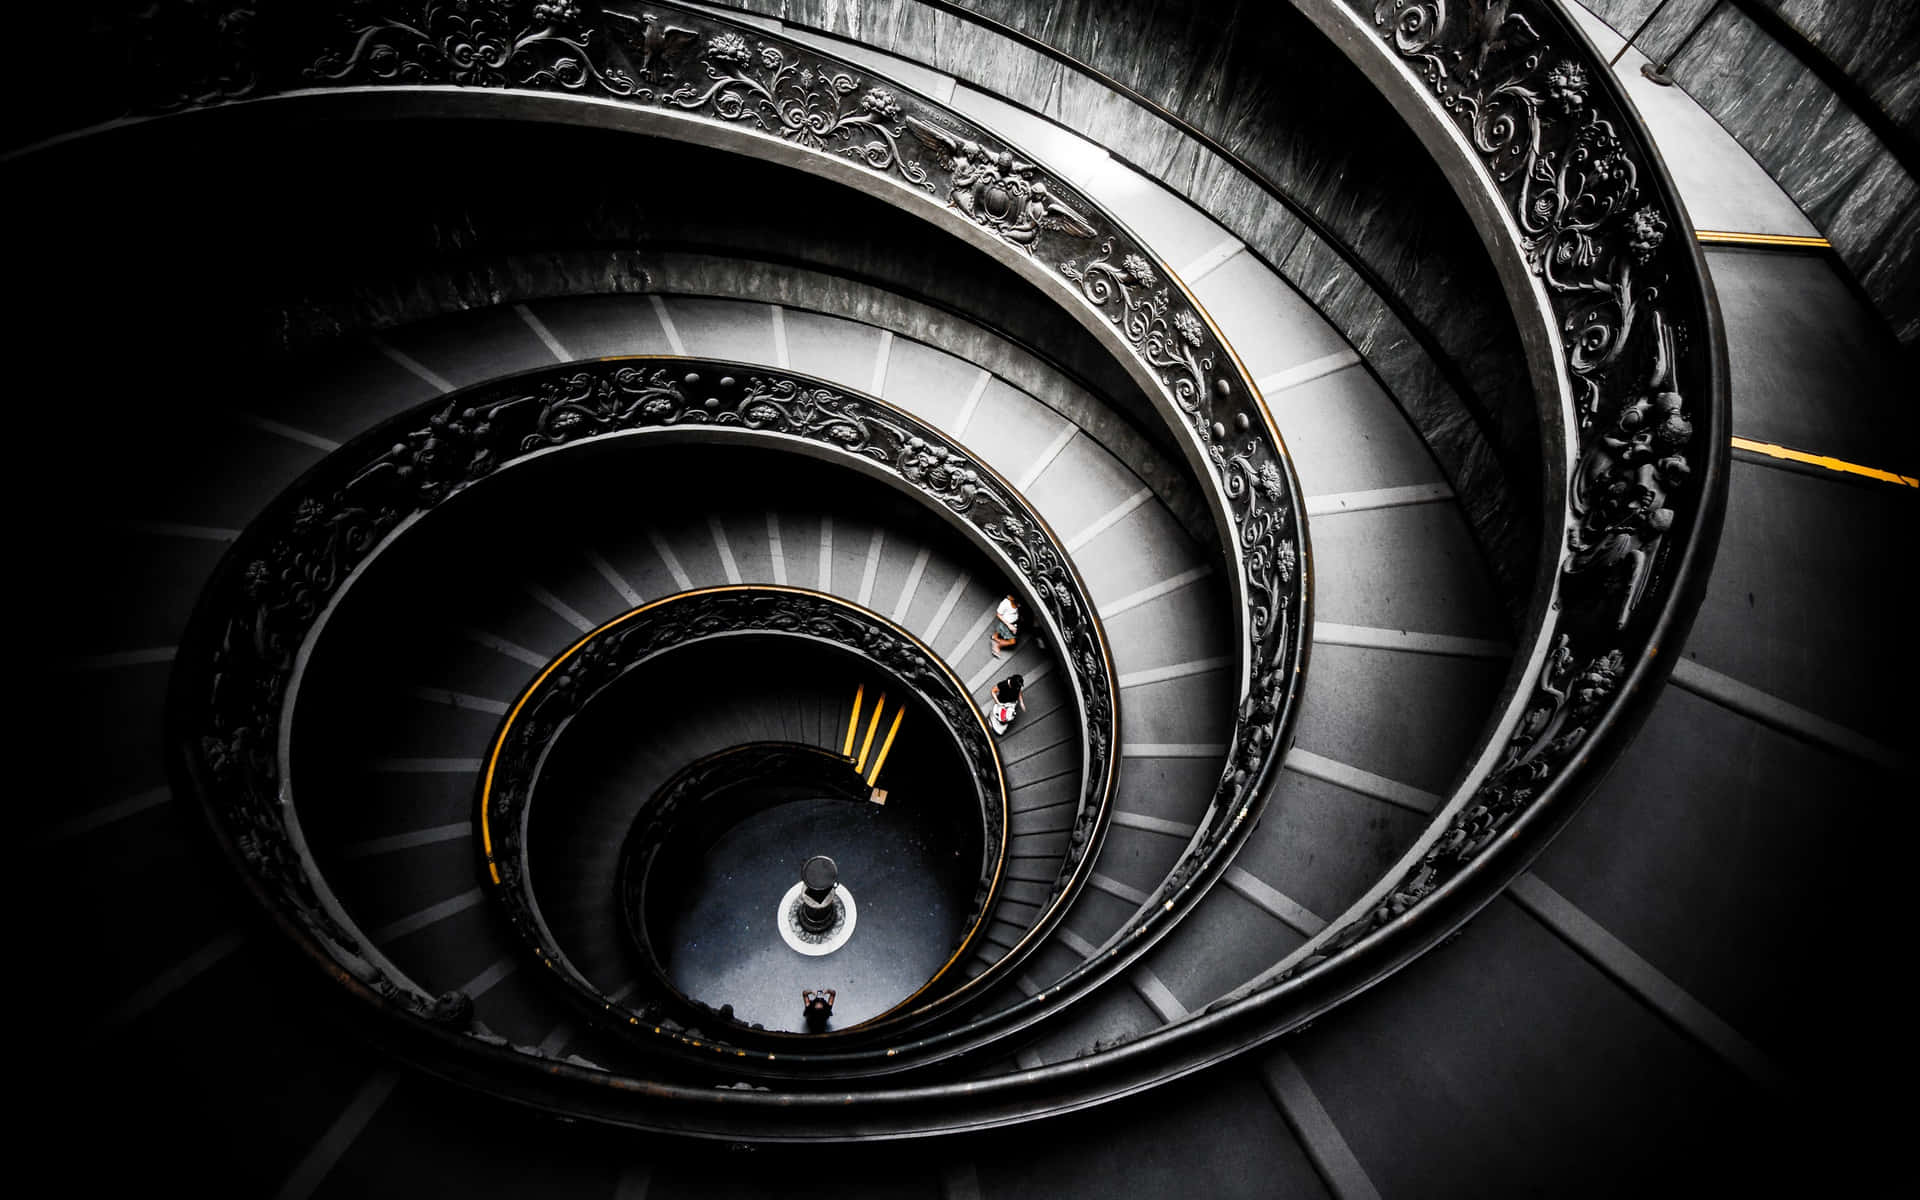 Get inspired by the complex beauty of a spiral